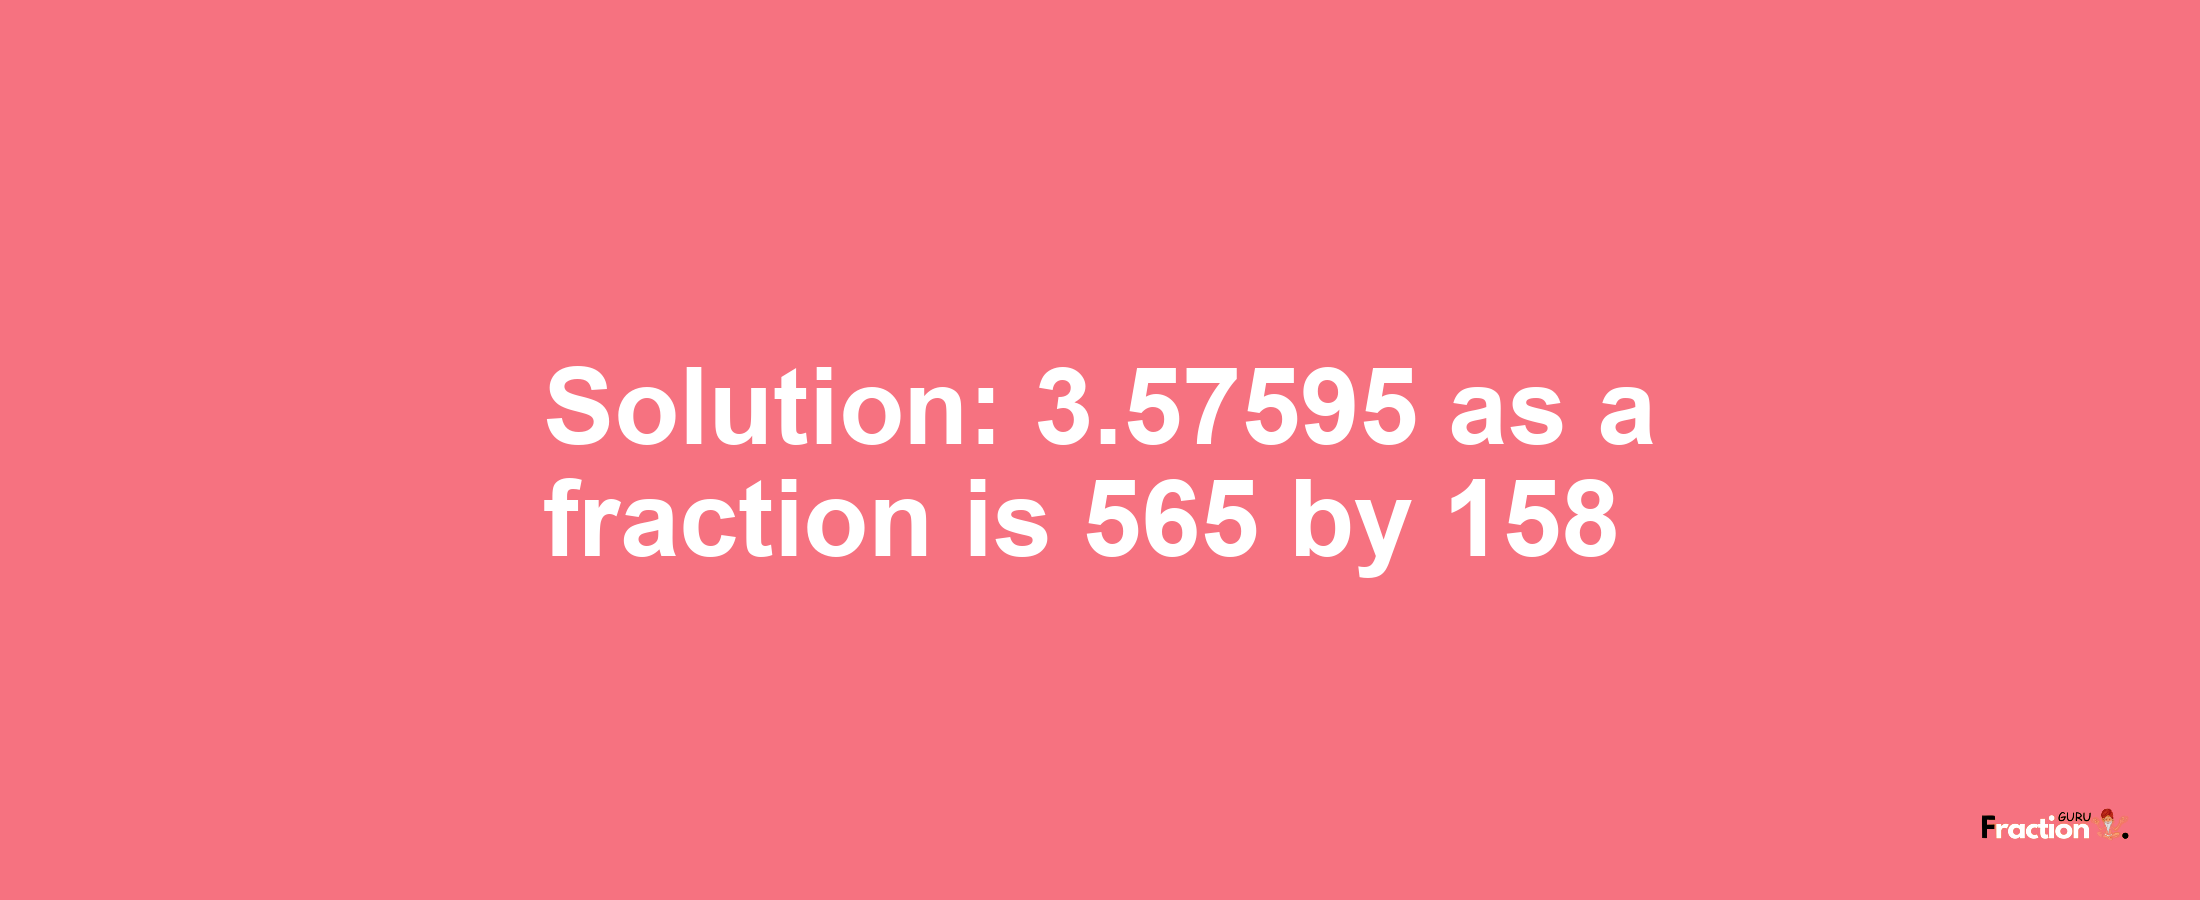 Solution:3.57595 as a fraction is 565/158